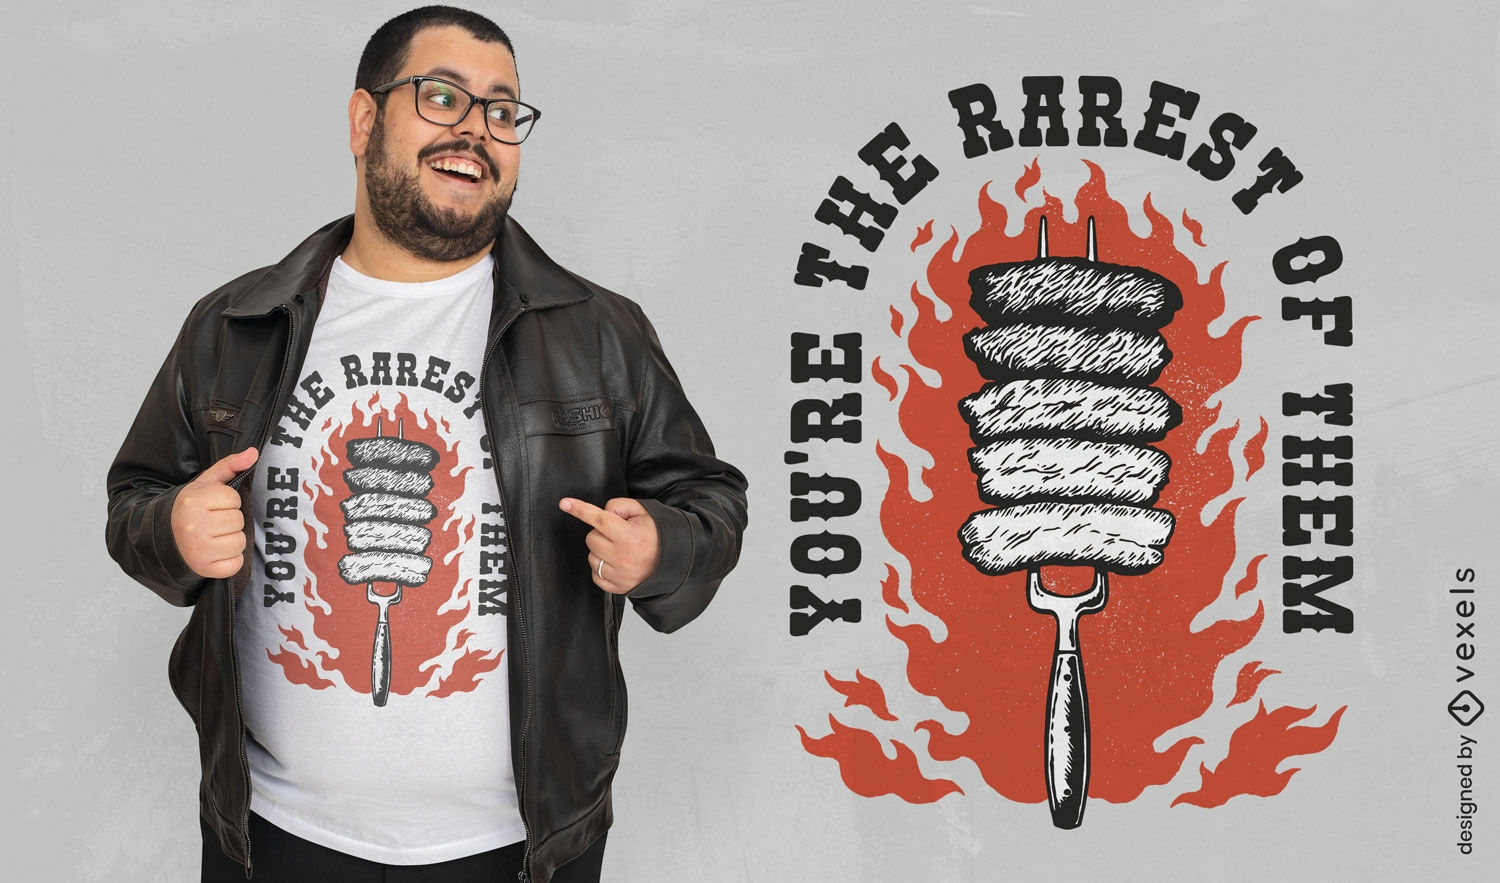 Barbecue enthusiast quote t-shirt design